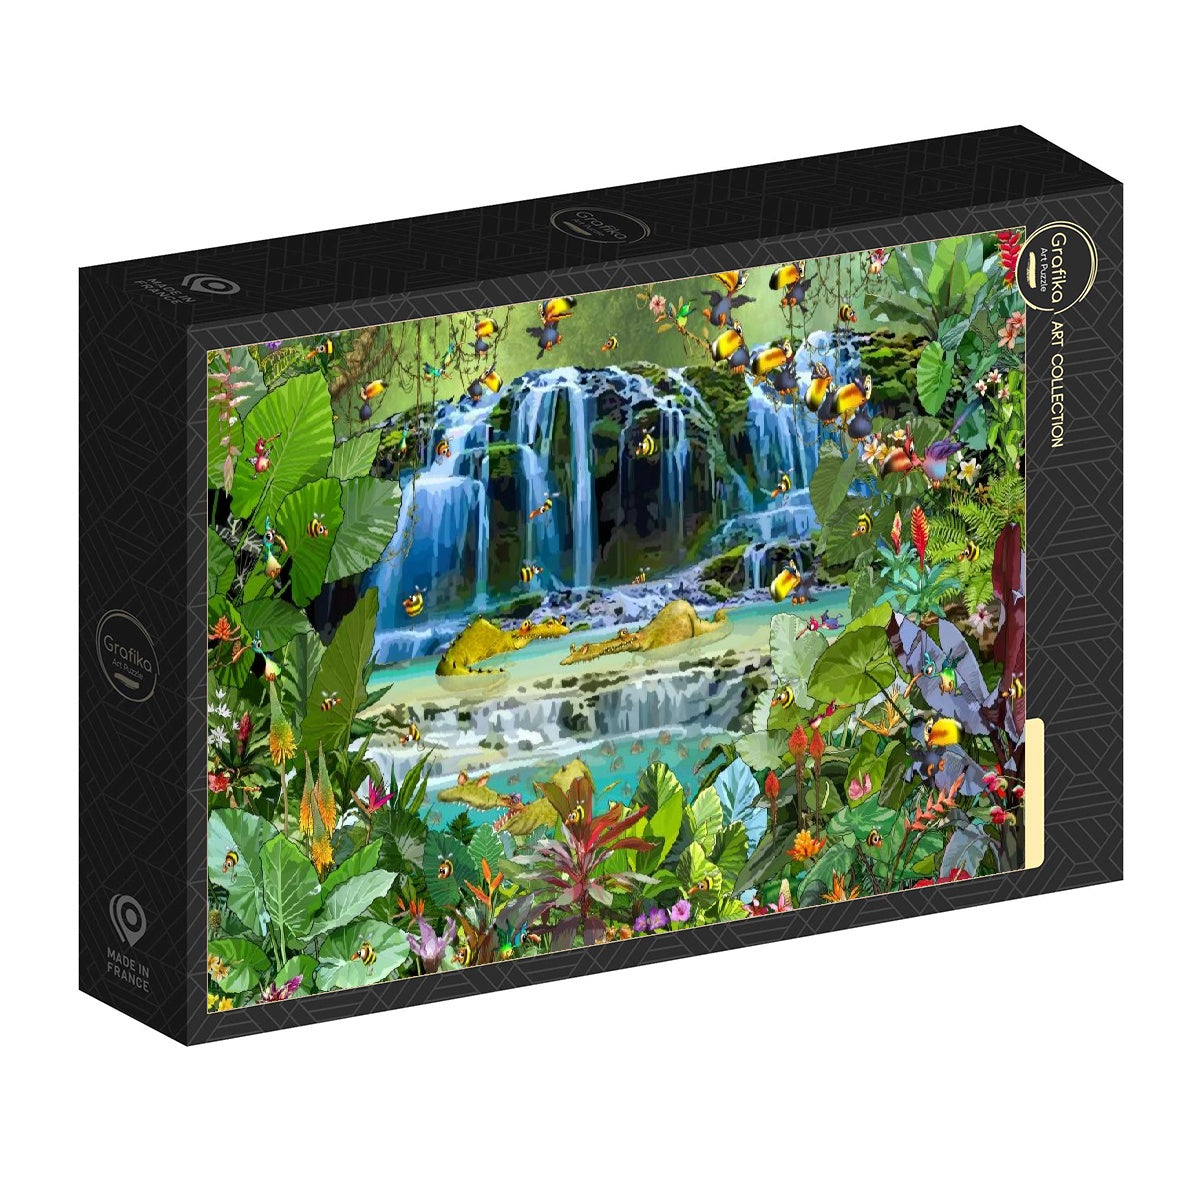 Waterfall by Francois Ruyer, 1000 Piece Puzzle